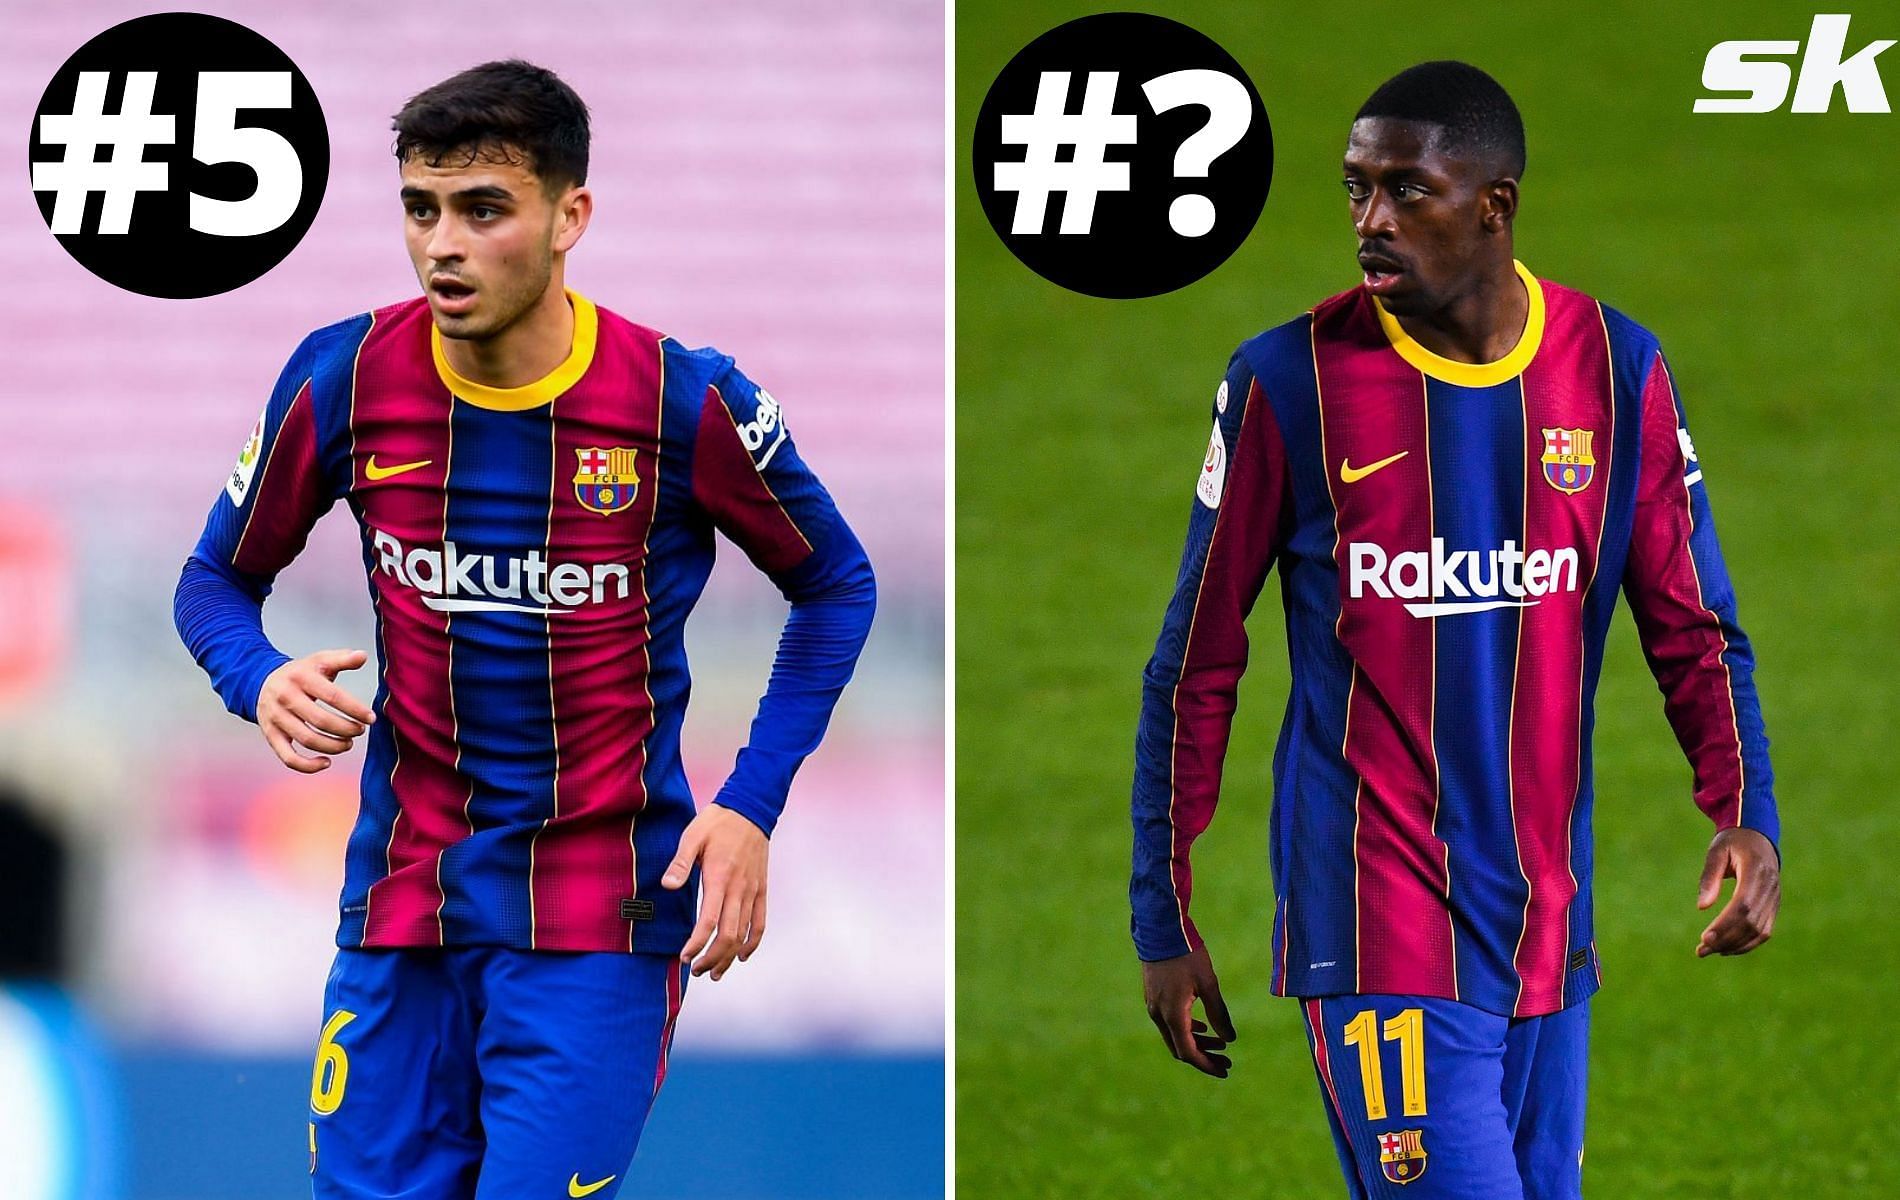 Who is the best dribbler in the current Barcelona side?